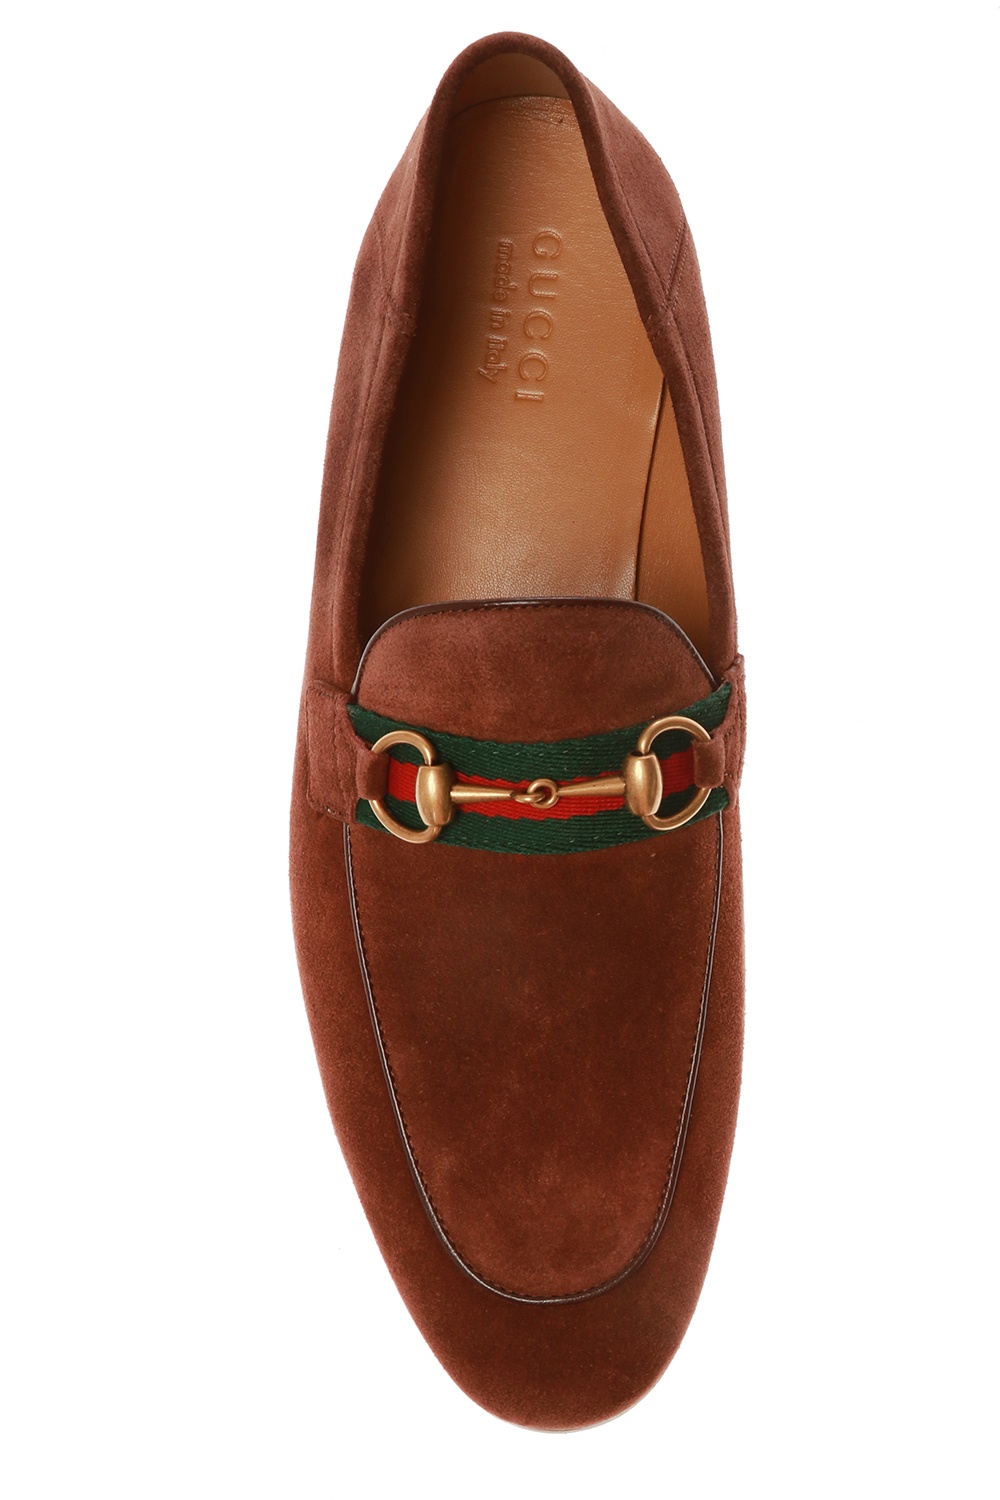 Gucci loafers | Men's Shoes Vitkac